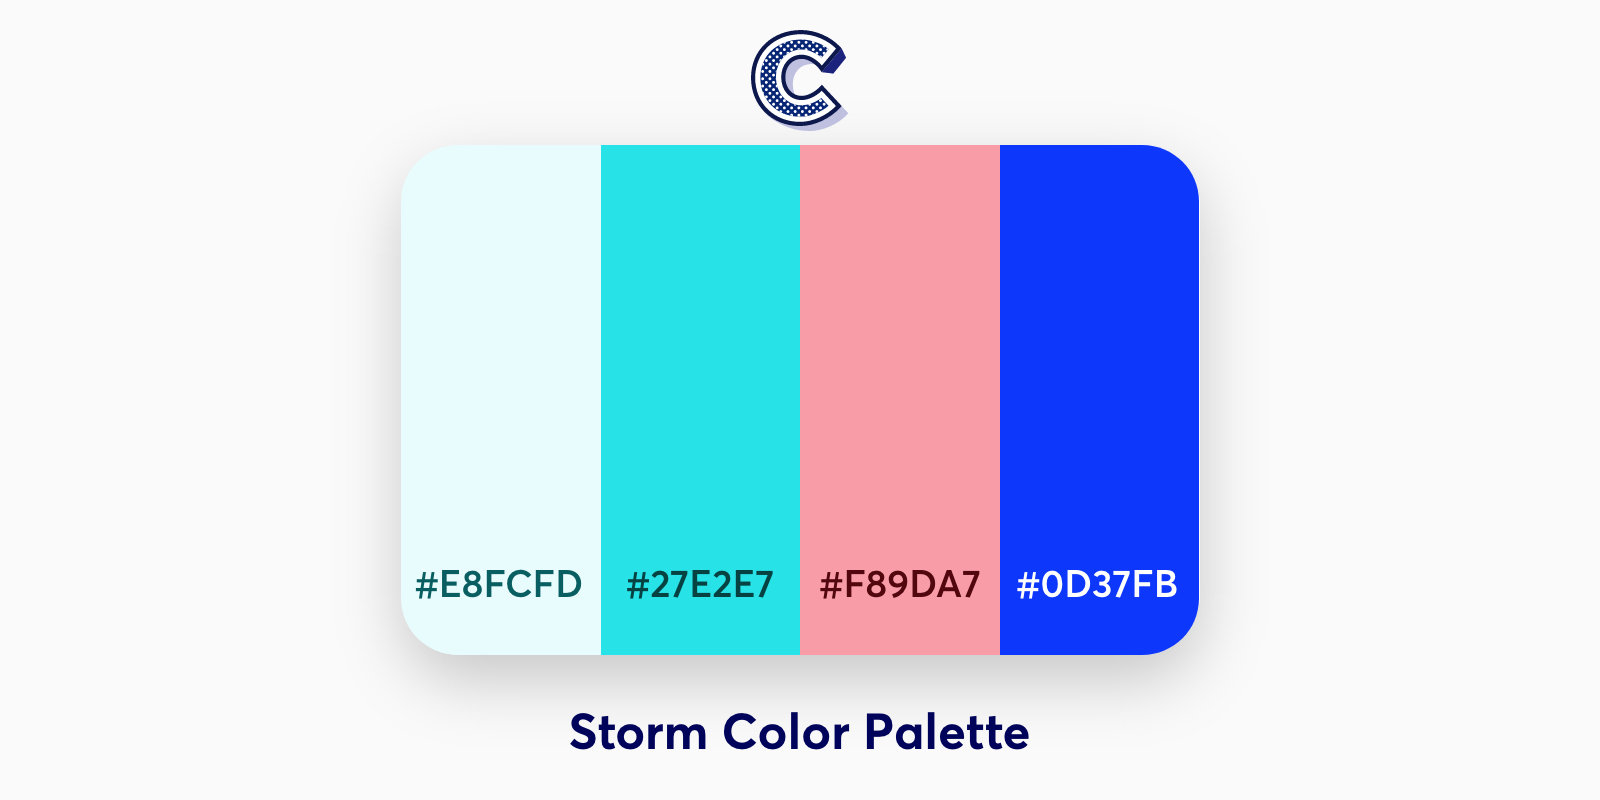 the featured image of storm color palette